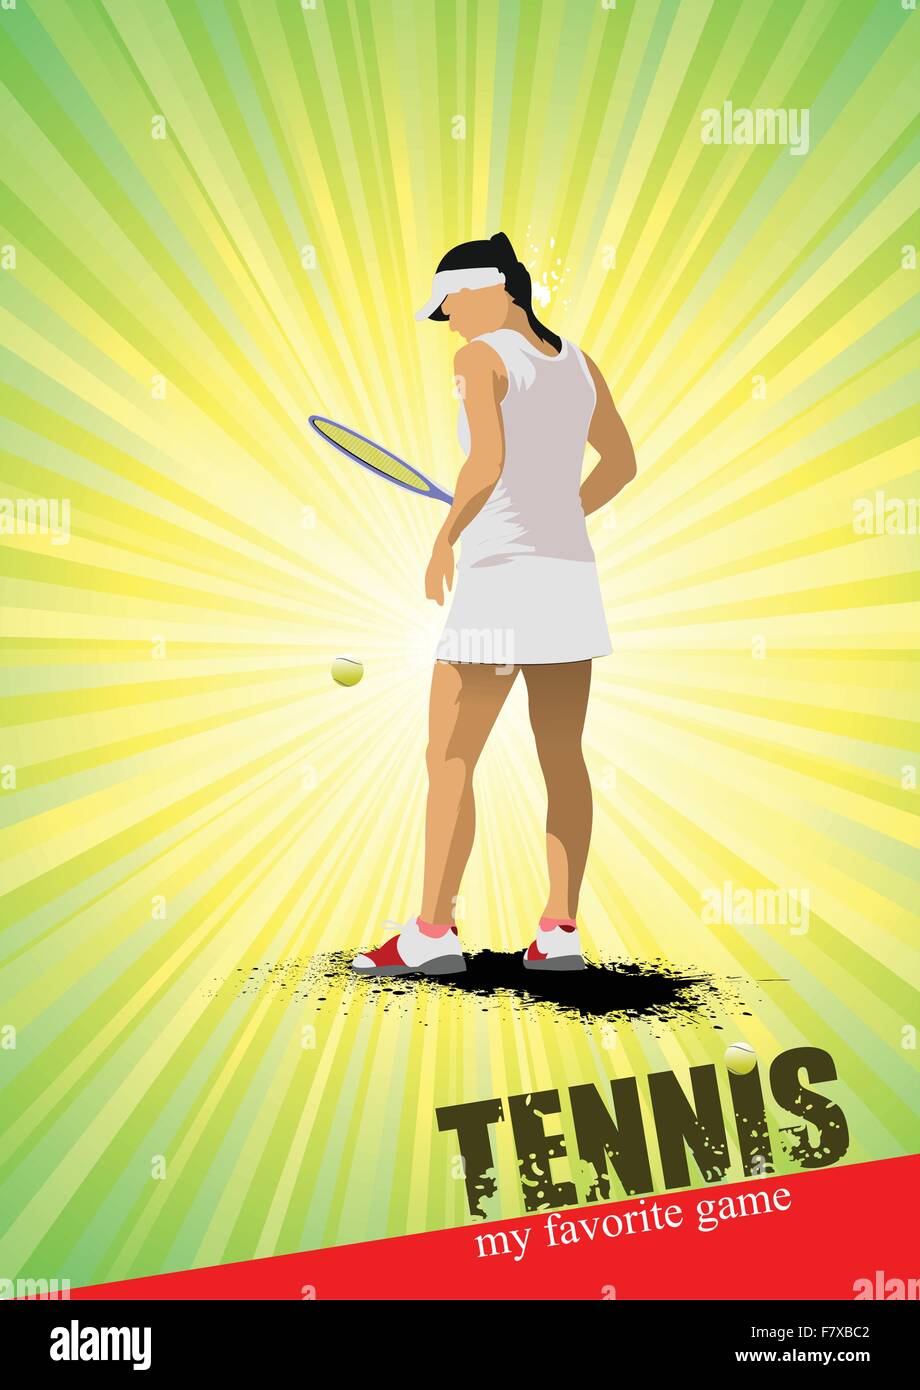 Woman tennis poster. My favorite game. Vector illustration Stock Vector